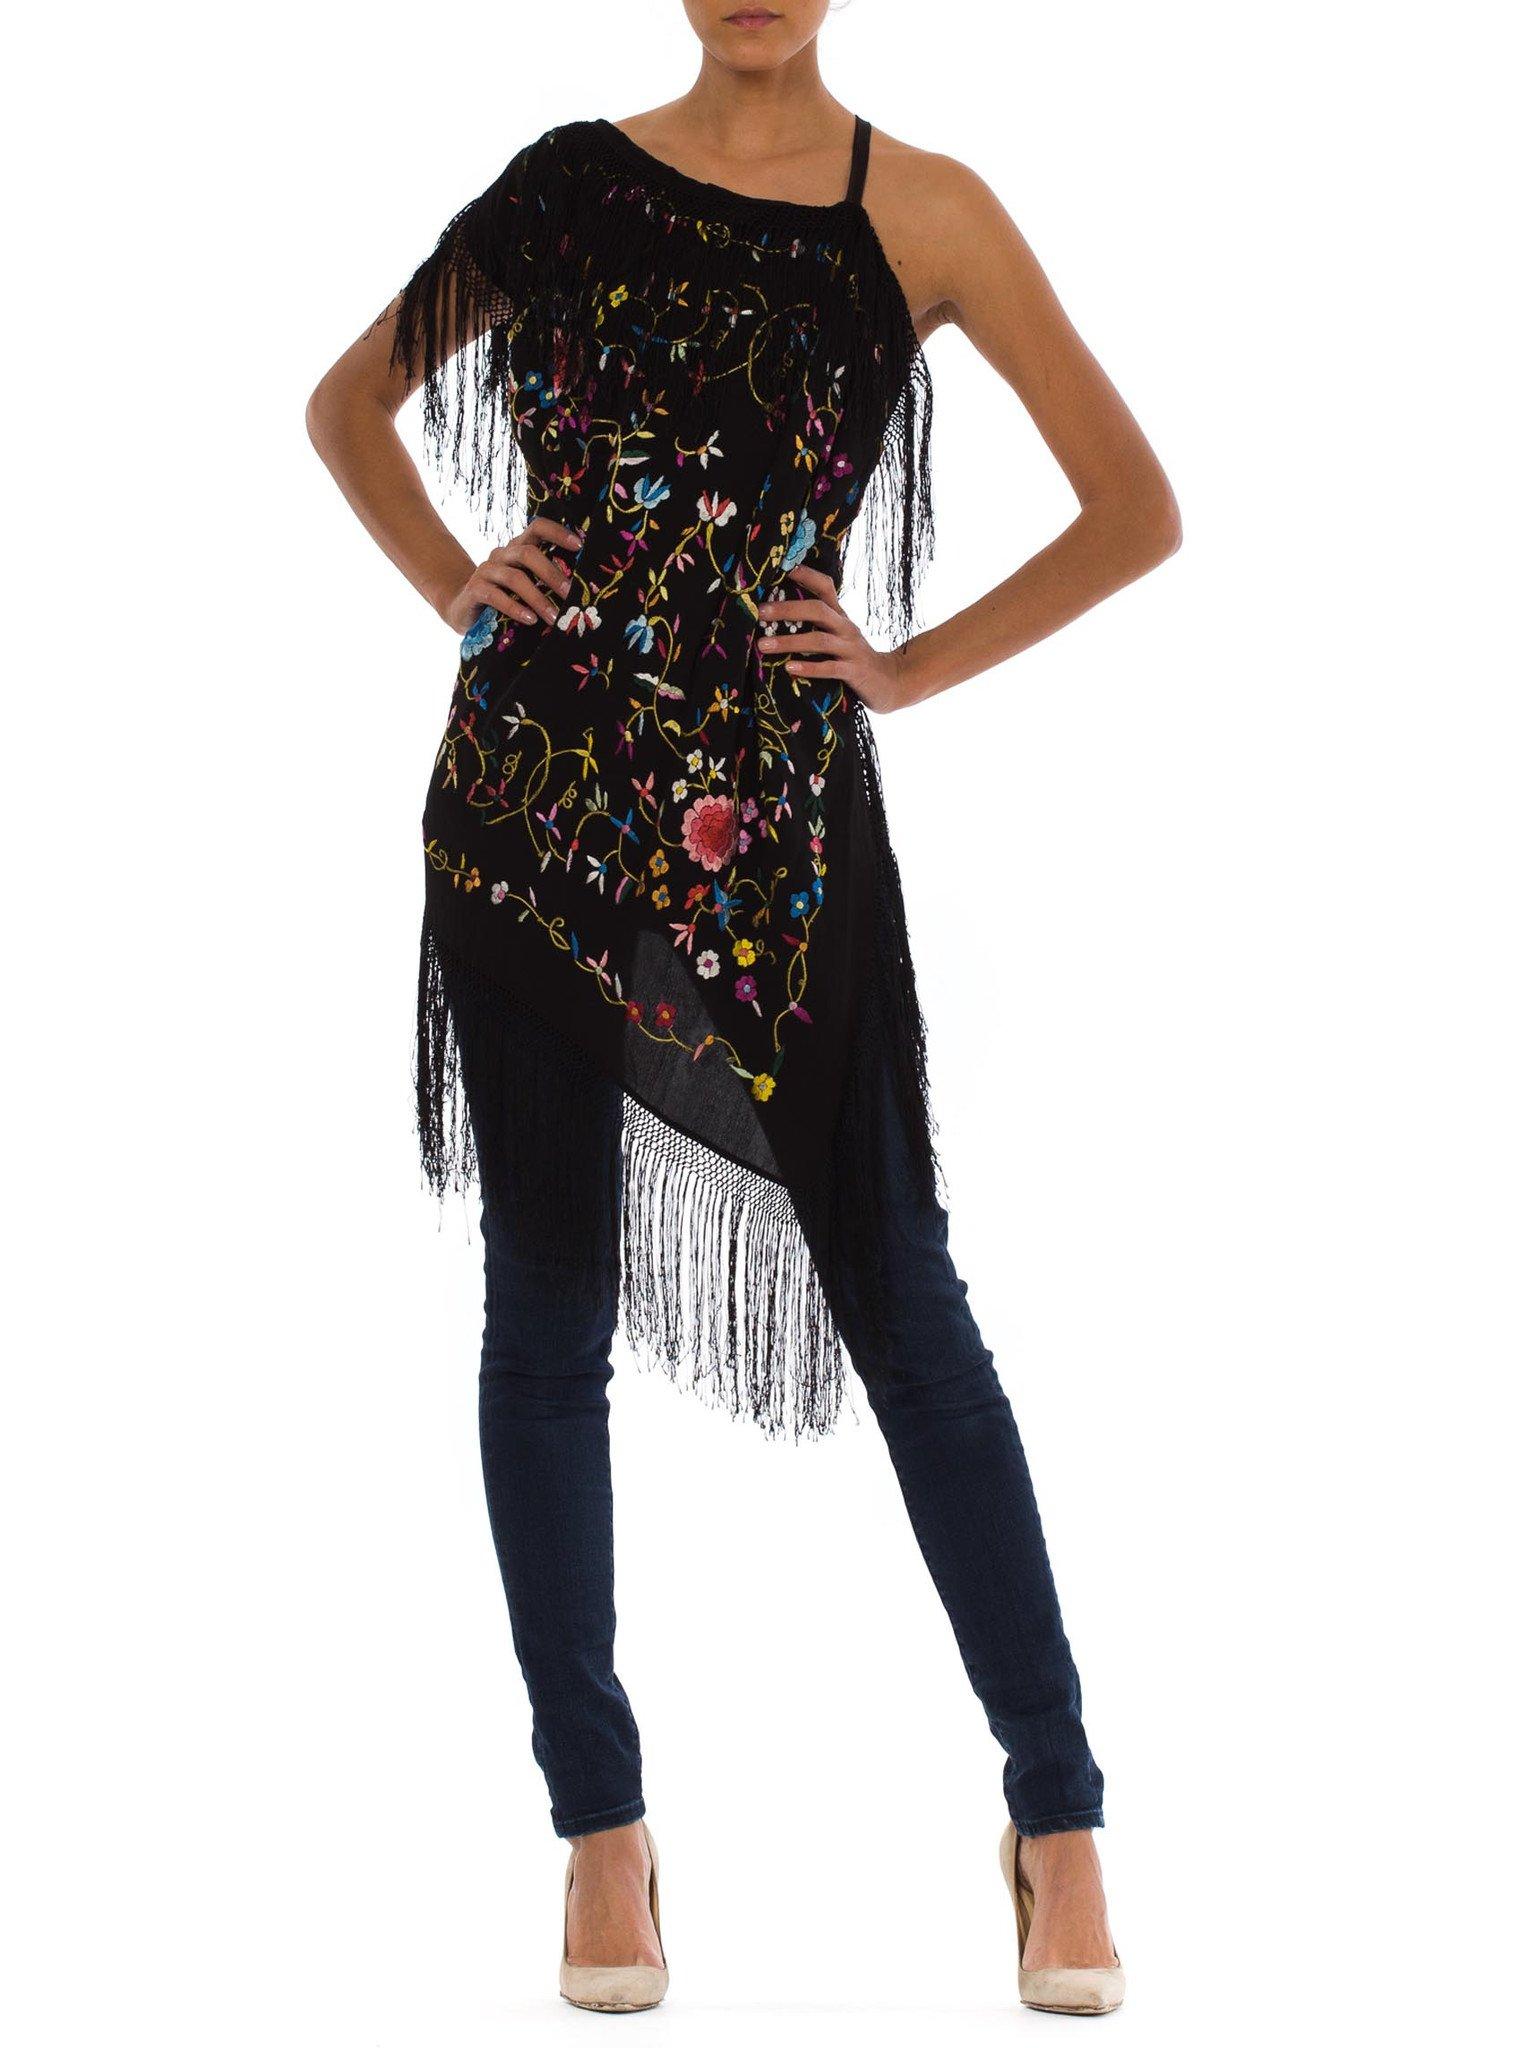 Black Rayon Hand Embroidered Asymmetrical Piano Shawl Top With Fringe
MORPHEW COLLECTION is made entirely by hand in our NYC Ateliér of rare antique materials sourced from around the globe. Our sustainable vintage materials represent over a century